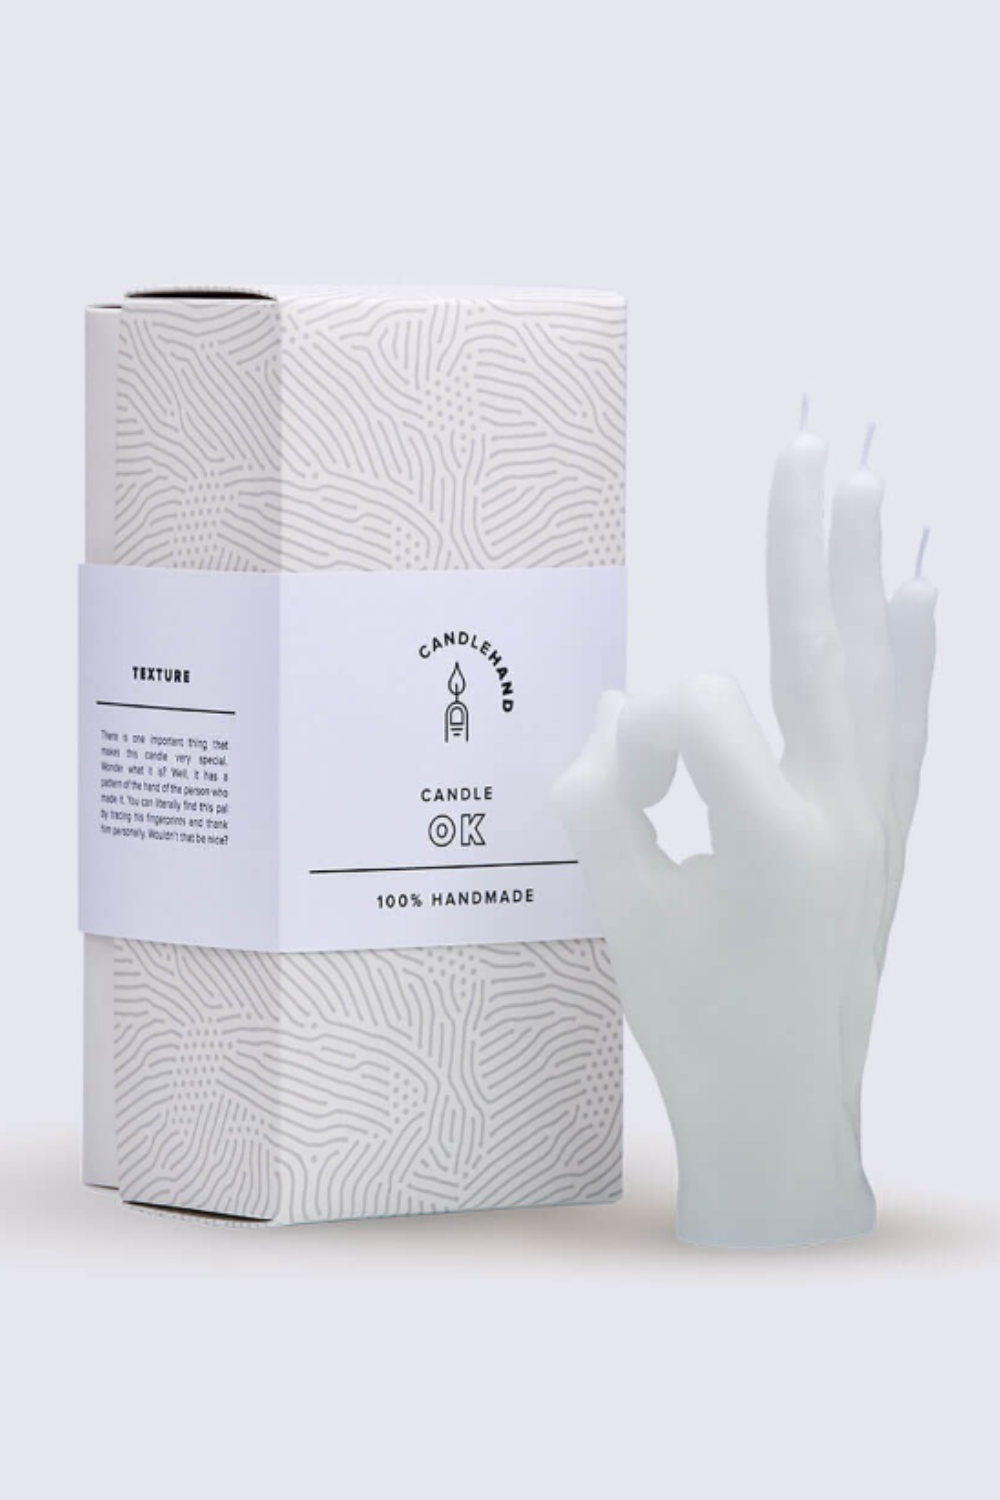 "OK" CANDLE HAND GESTURE WHITE